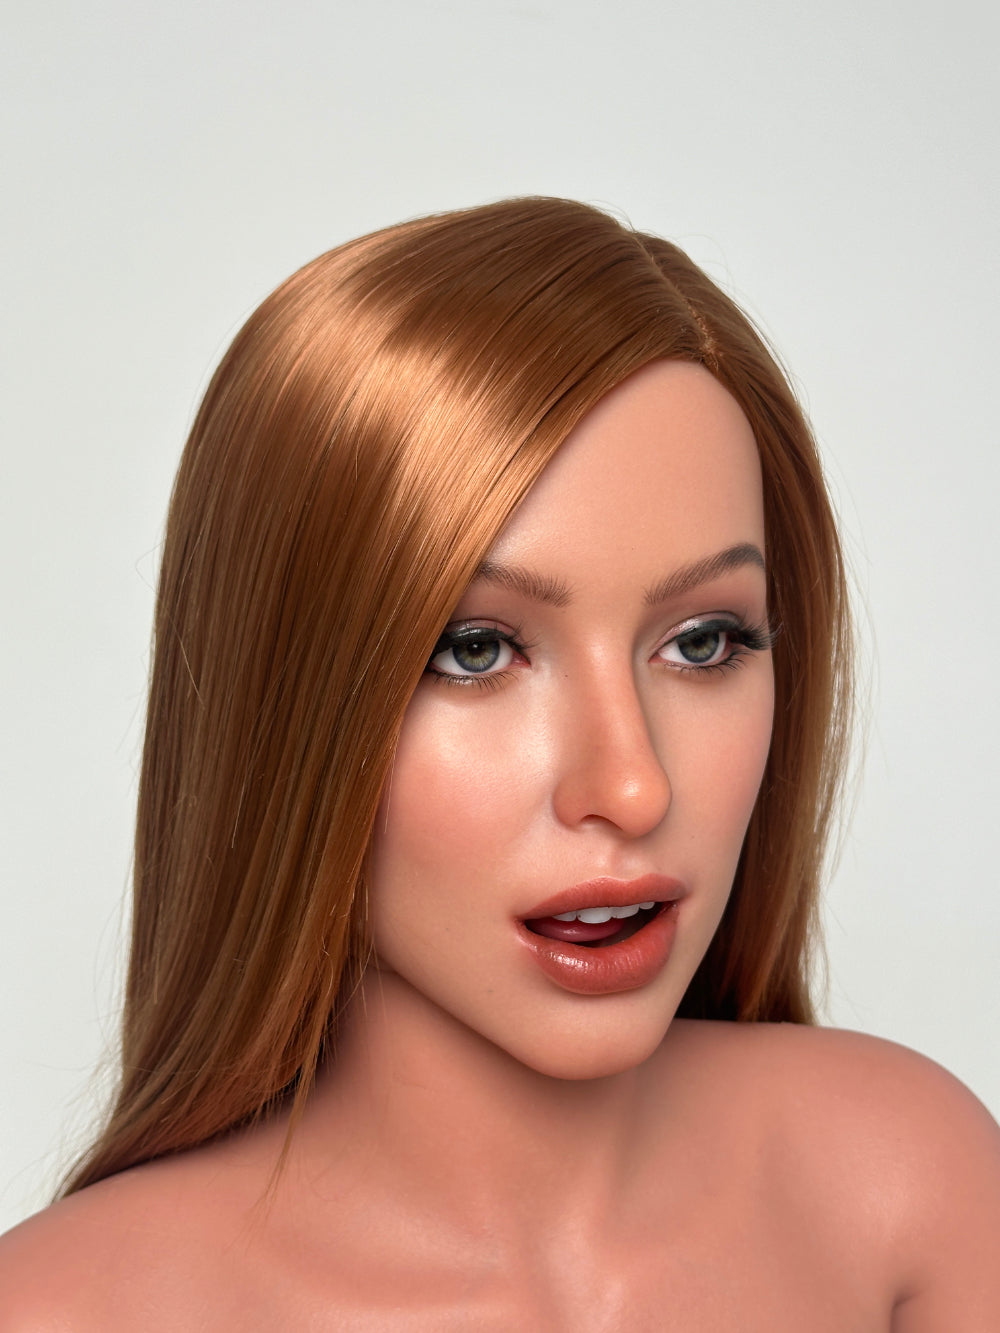 Zelex Doll SLE Series 153 cm B Silicone - ZXE208-3  Movable Jaw